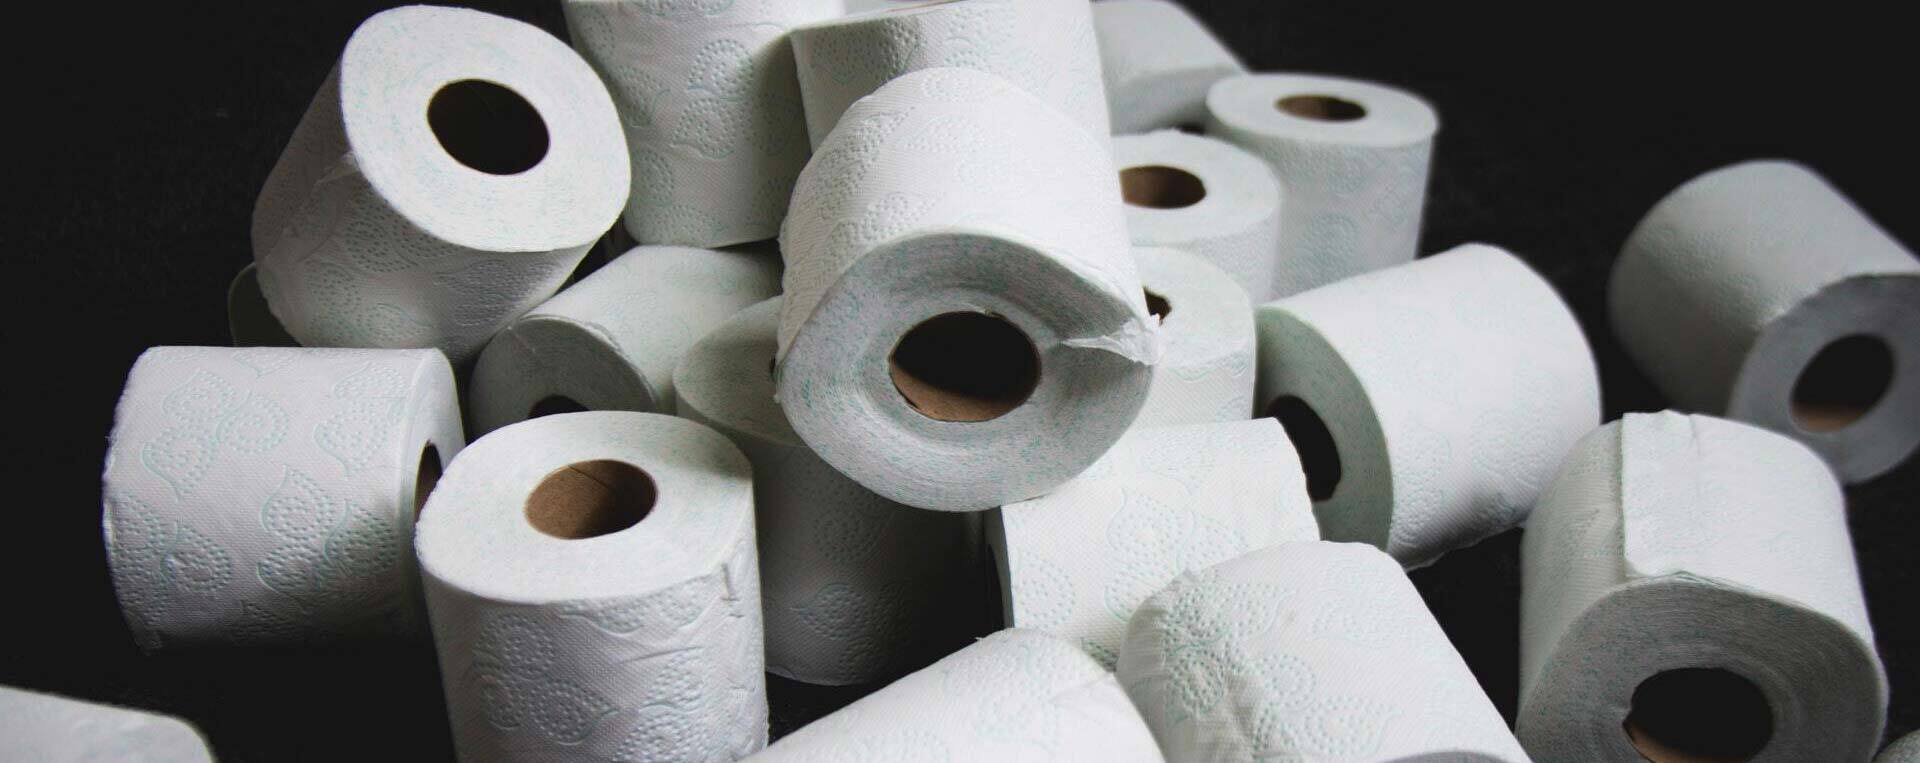 Toilet rolls on a black background